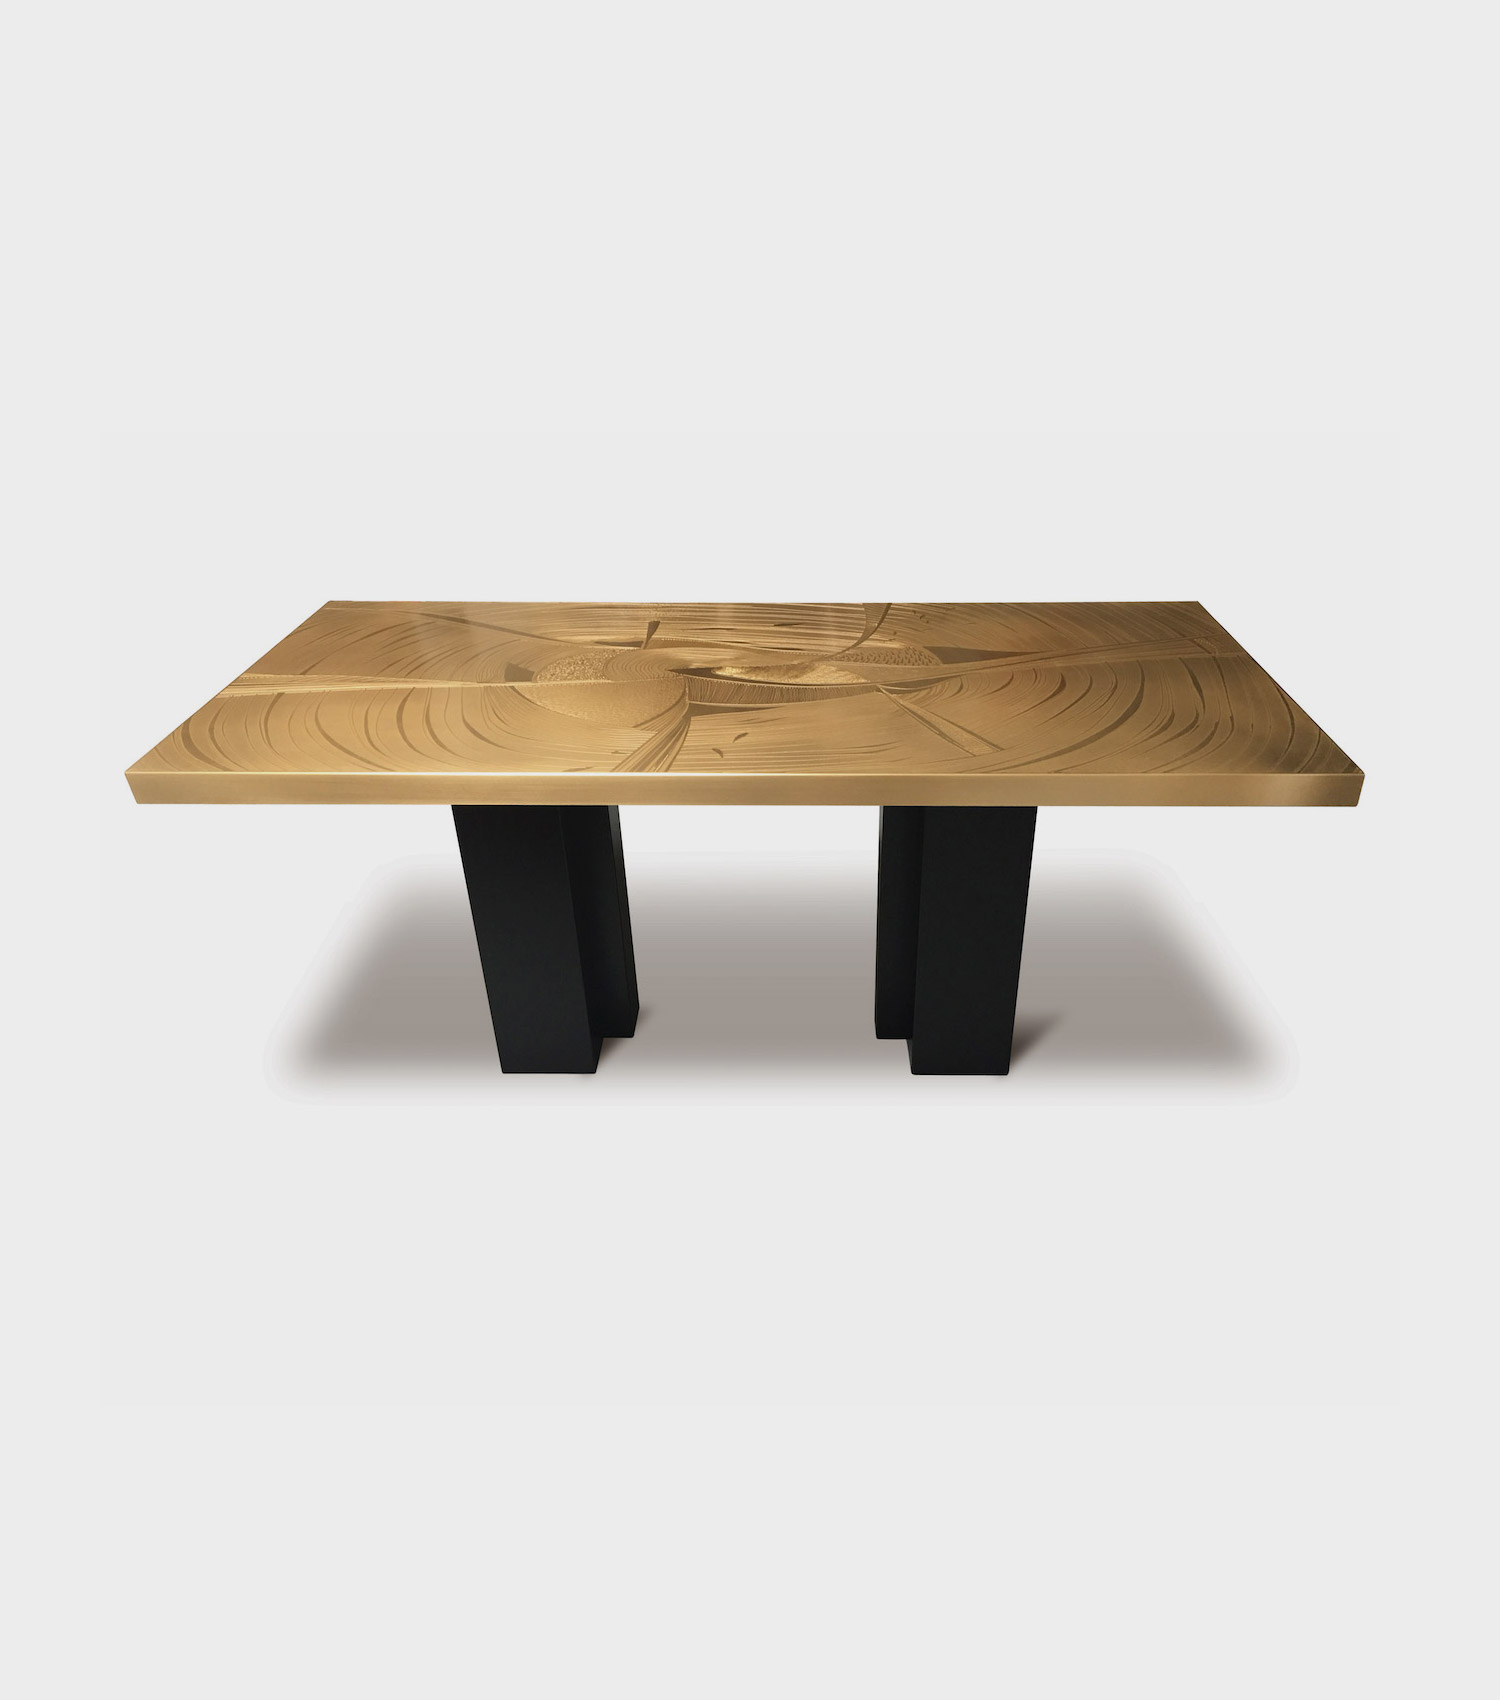 The Contour Dining Table by Christian Heckscher